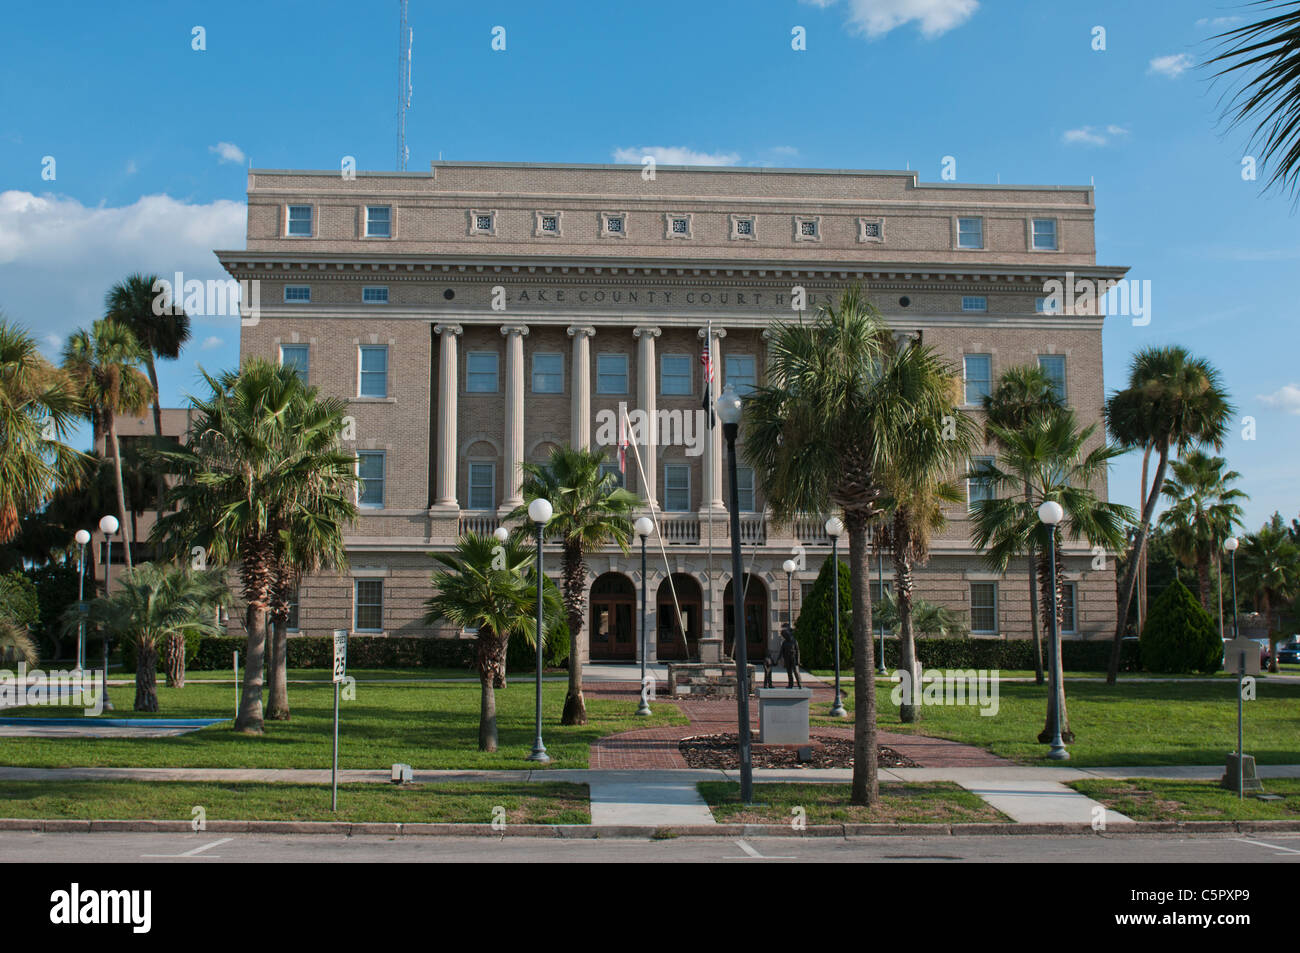 Lake County Court House located in Tavares, Florida USA Stock Photo